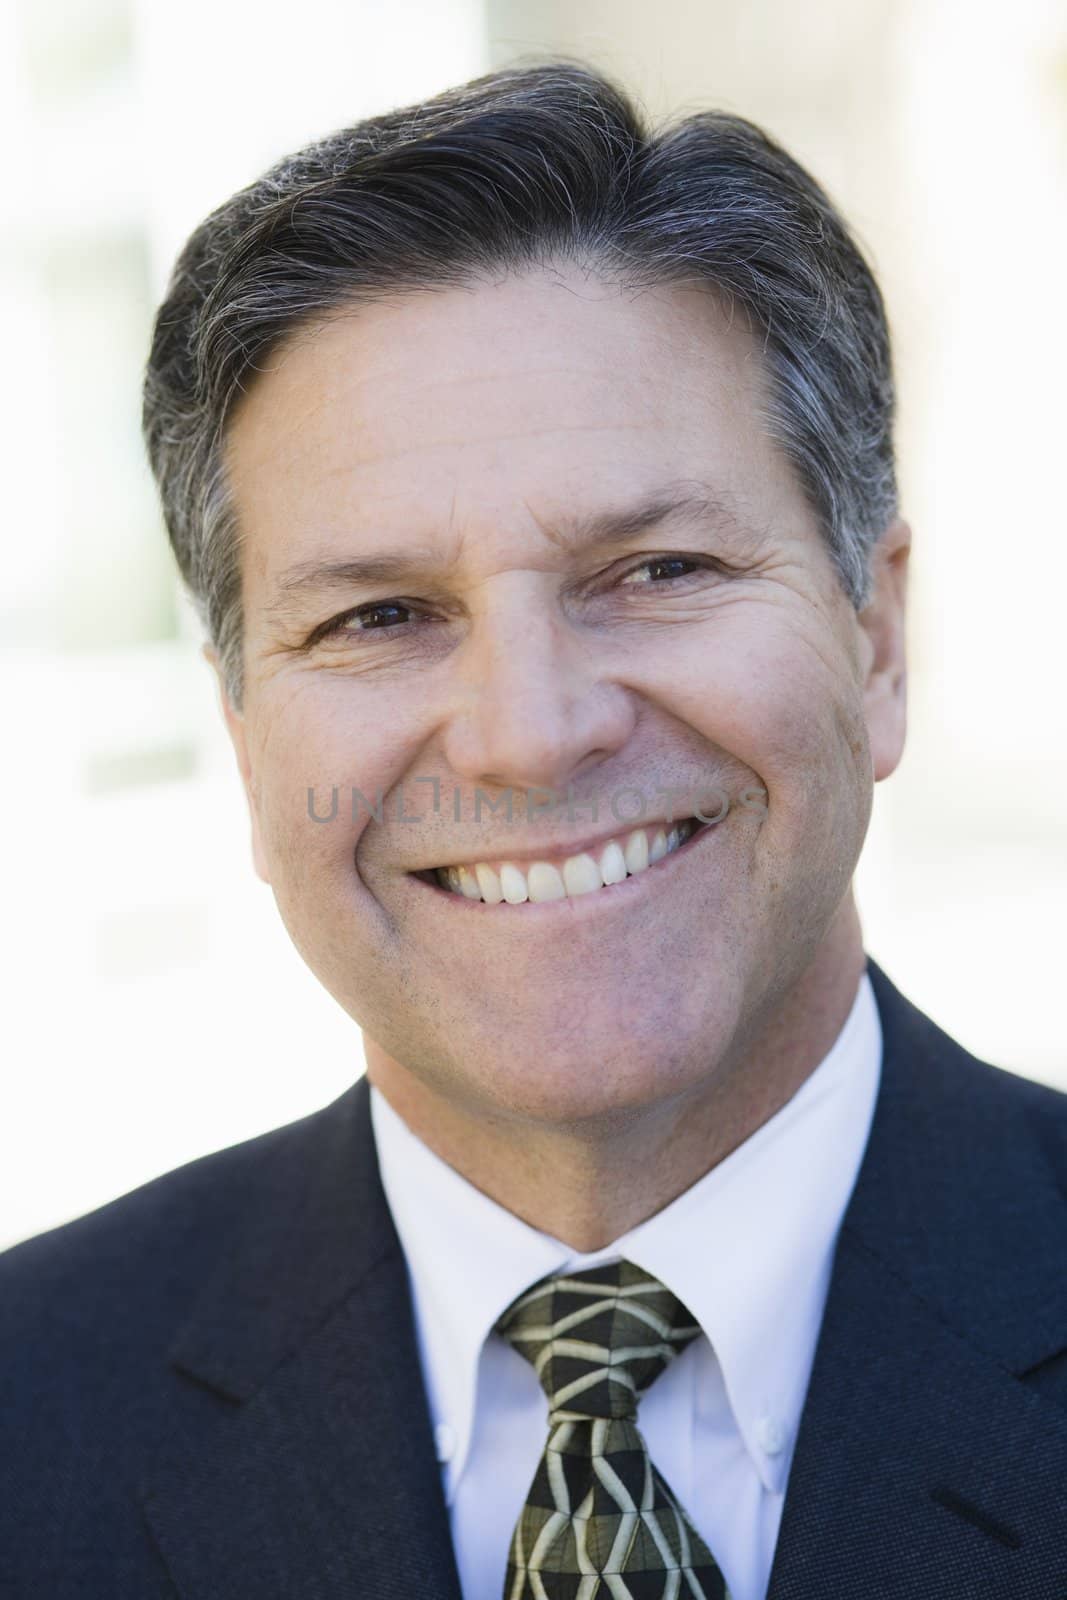 Portrait of a Smiling Businessman Looking Away From Camera